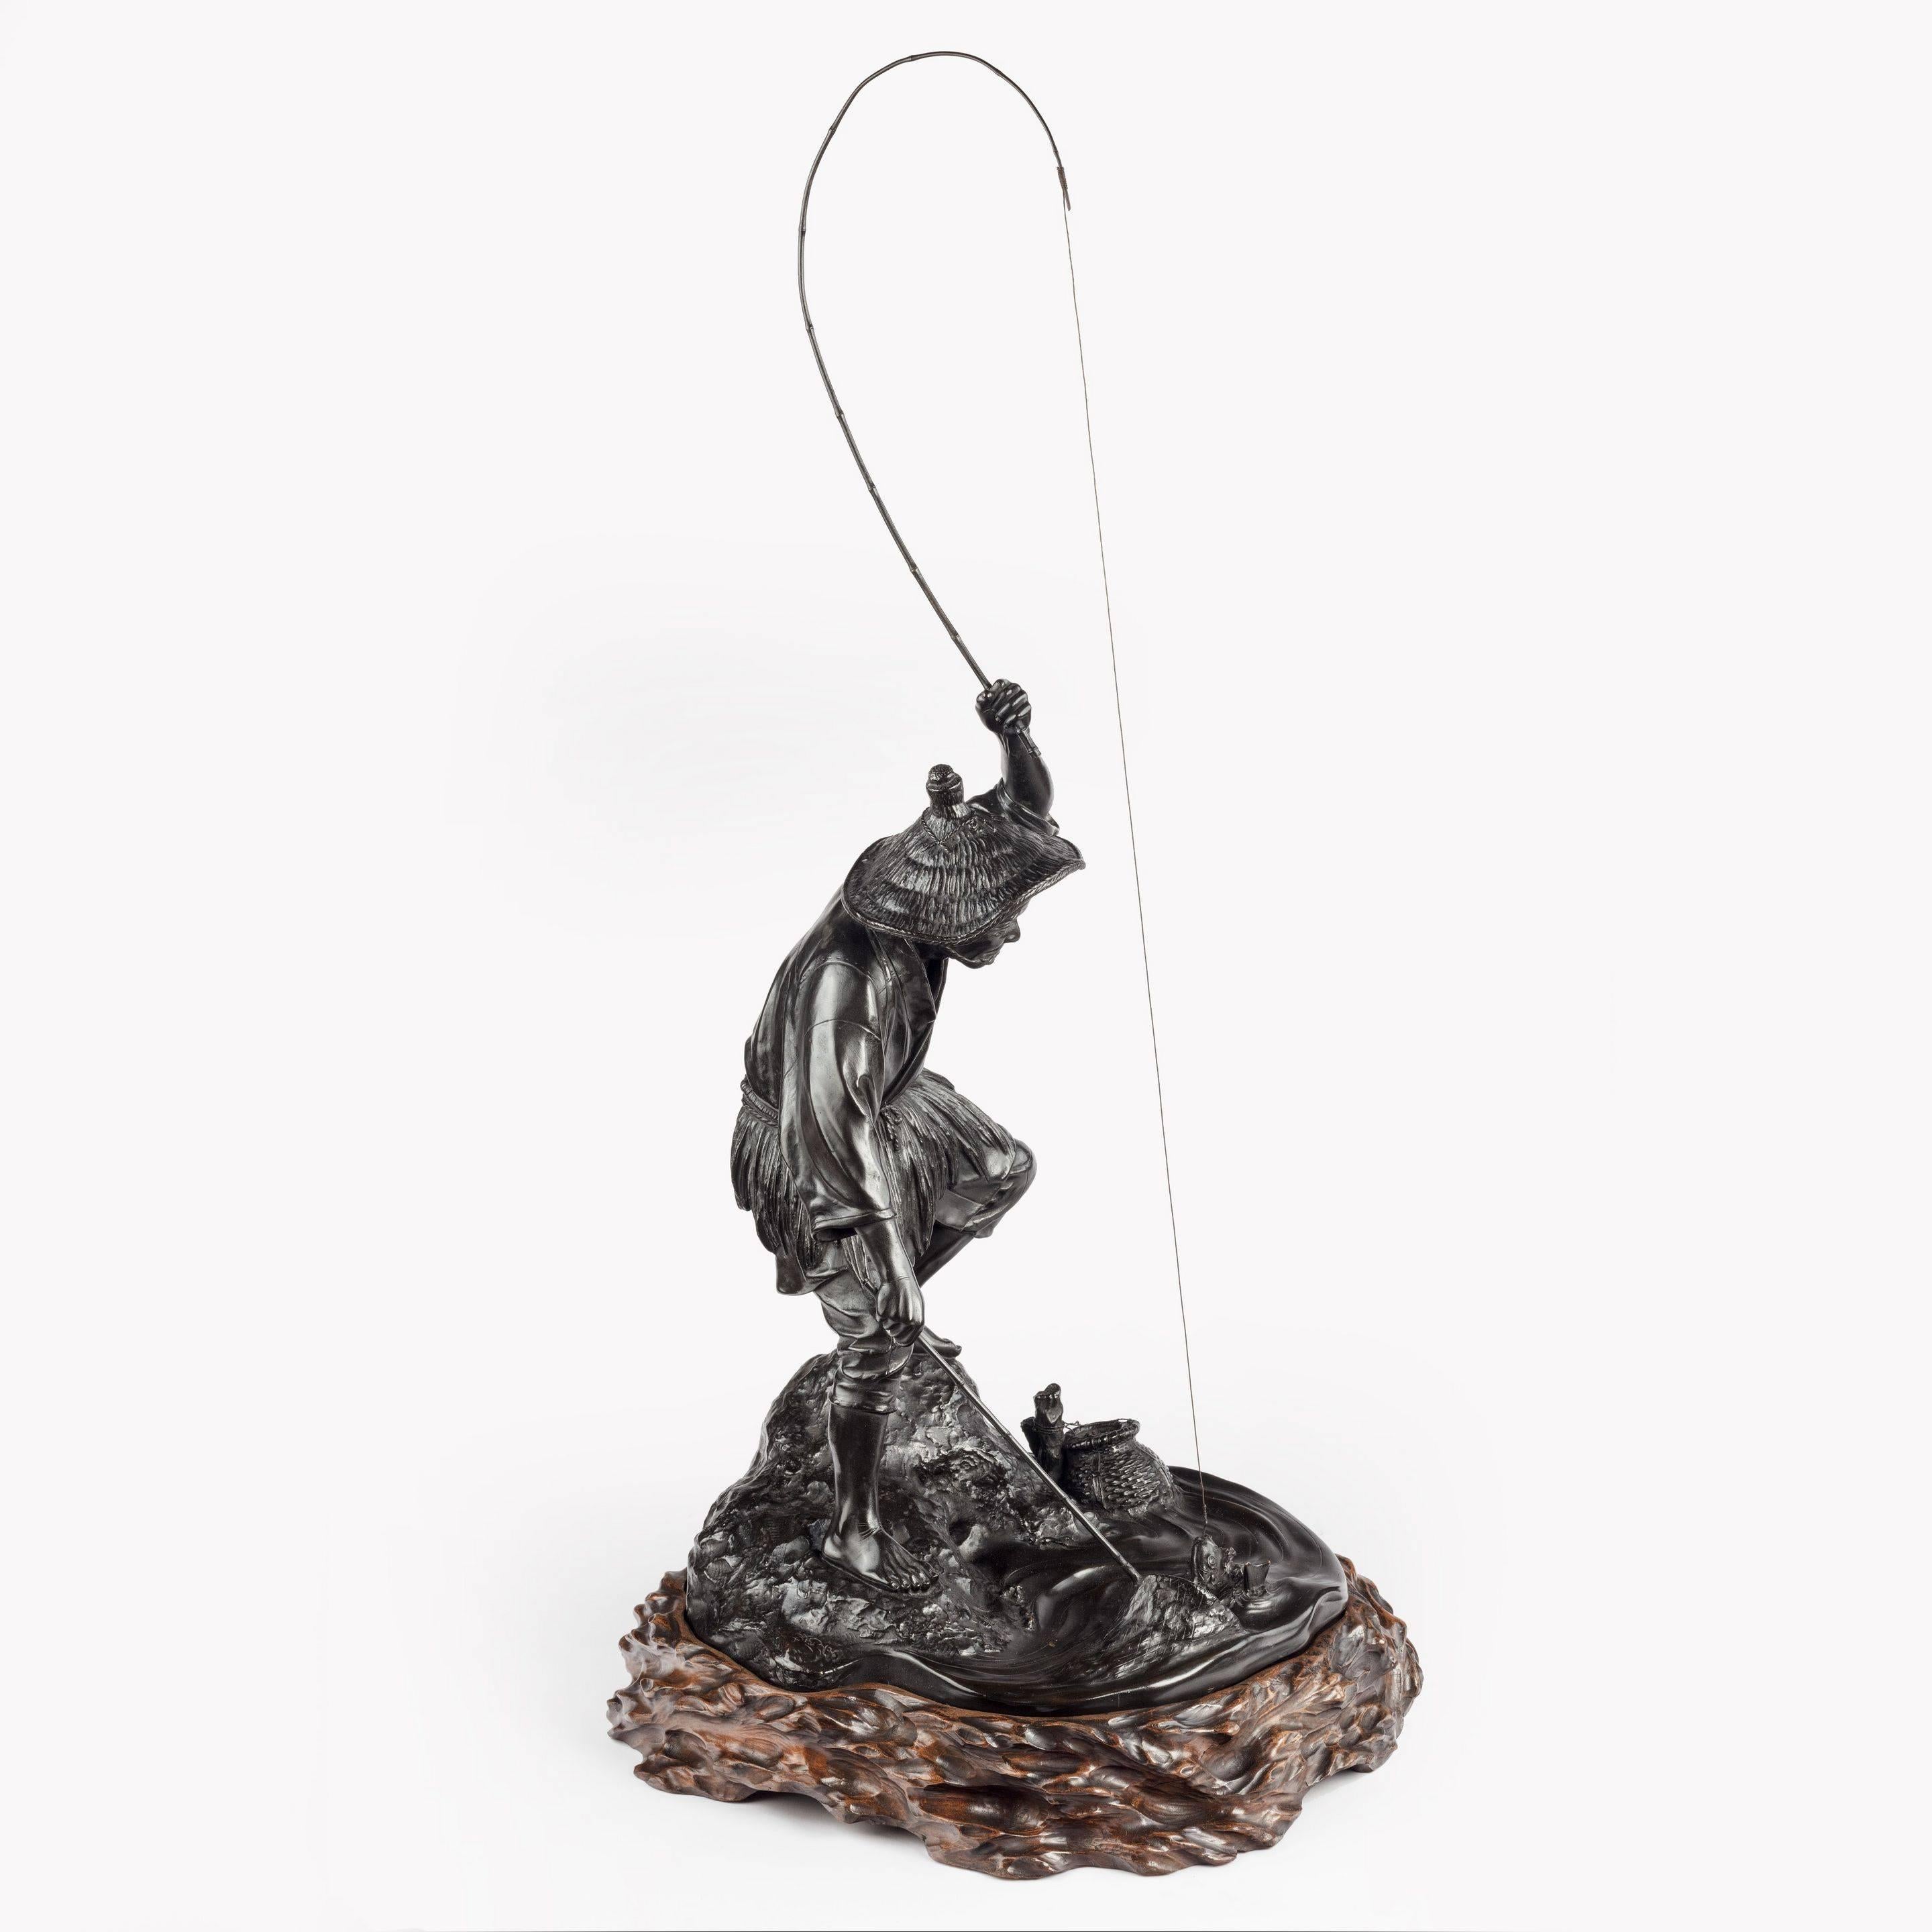 A dynamic Tokyo school bronze of a fisherman by Jonan, wearing a straw hat and rush apron he holds the rod and hooked fish in his left hand as he prepares to land the fish in his net, signed Jonan saku 城南作. Japanese, c1890. 

The quality and